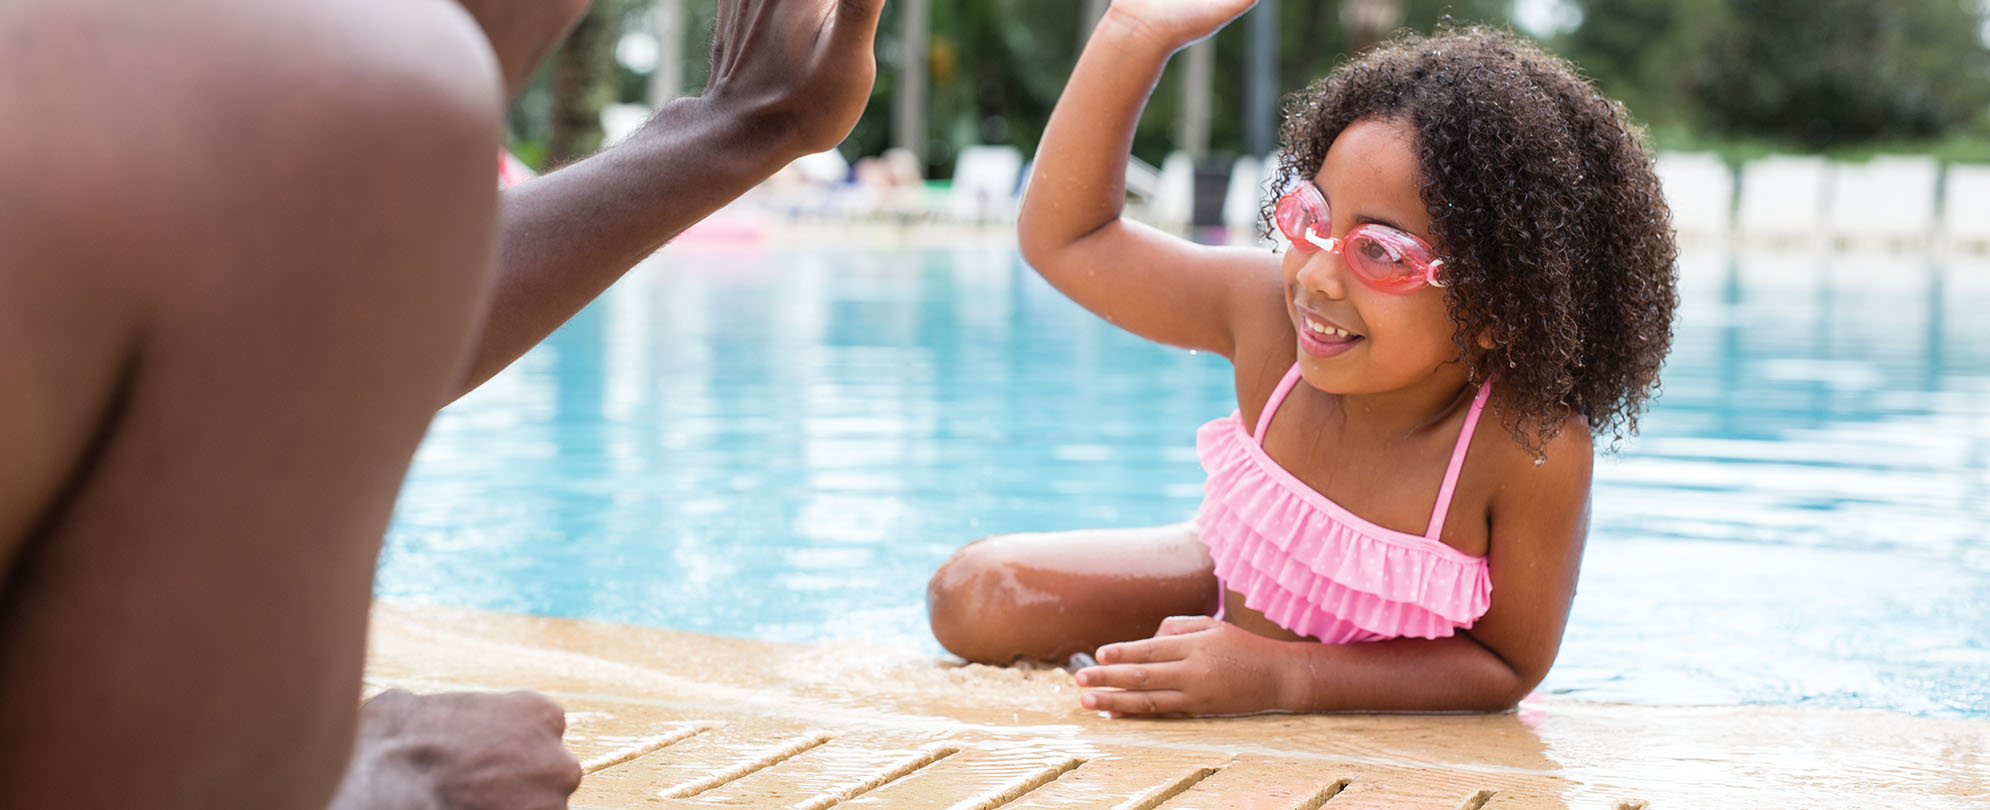 A young girl wearing goggles for swimming leans out of a WorldMark by Wyndham resort pool, high-fiving her parent.